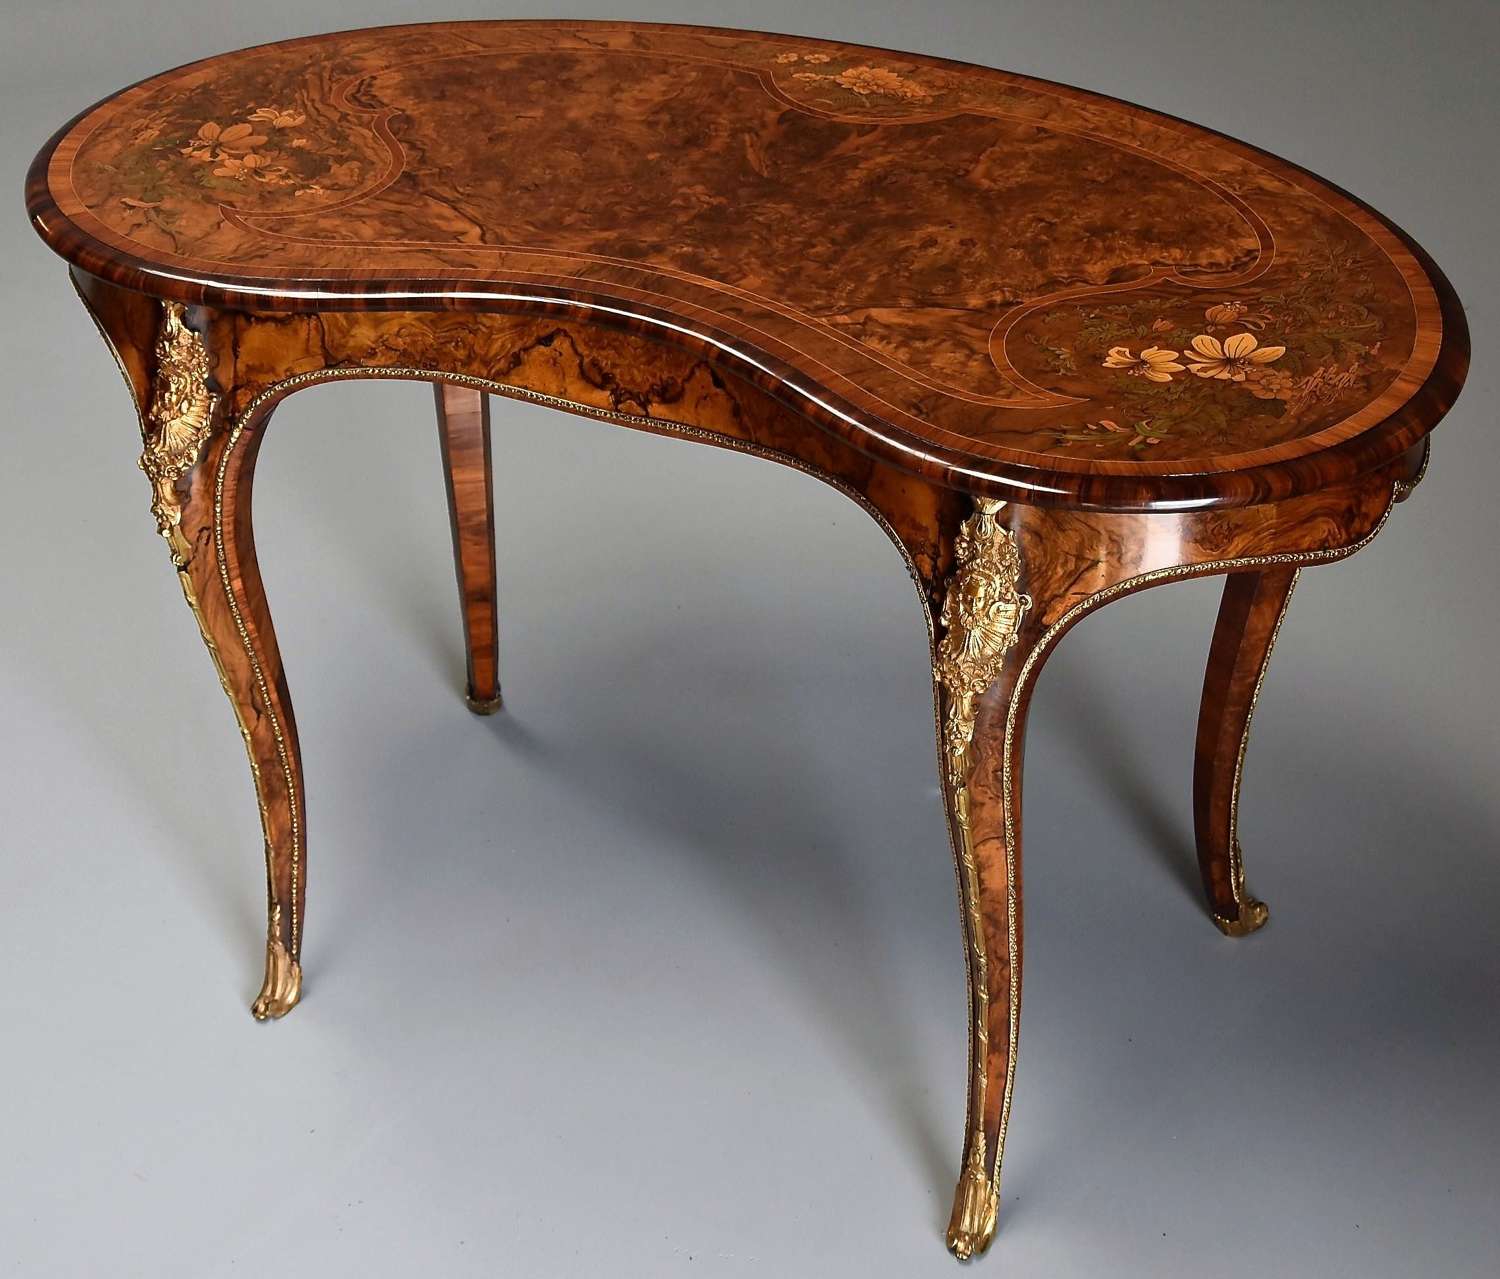 Superb 19thc walnut & marquetry kidney table in the manner of Gillows